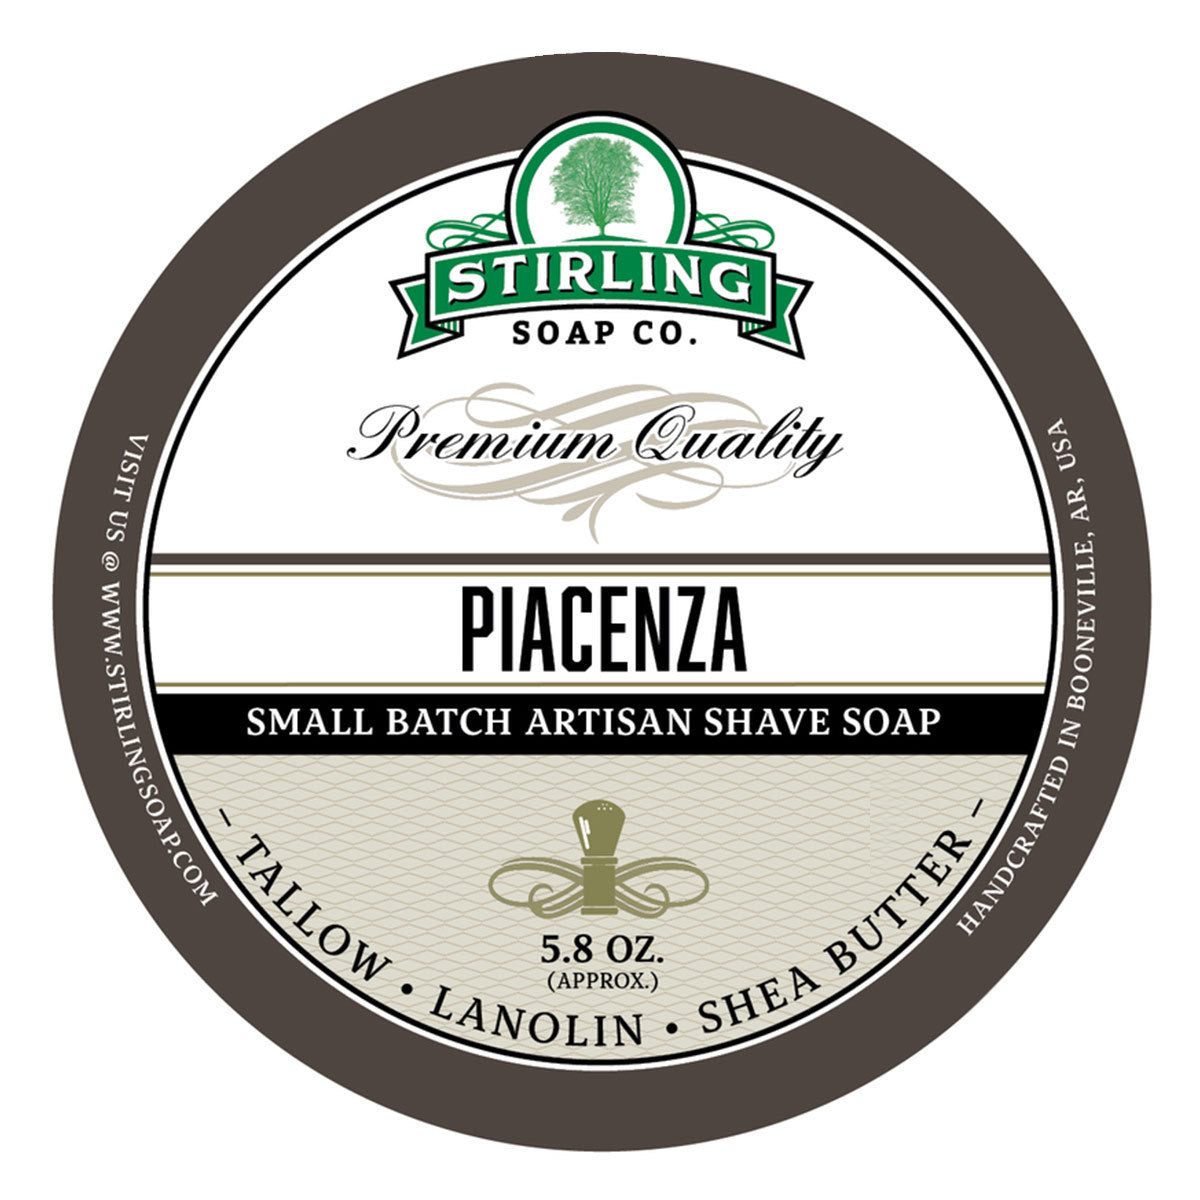 Primary image of Piacenza Shave Soap